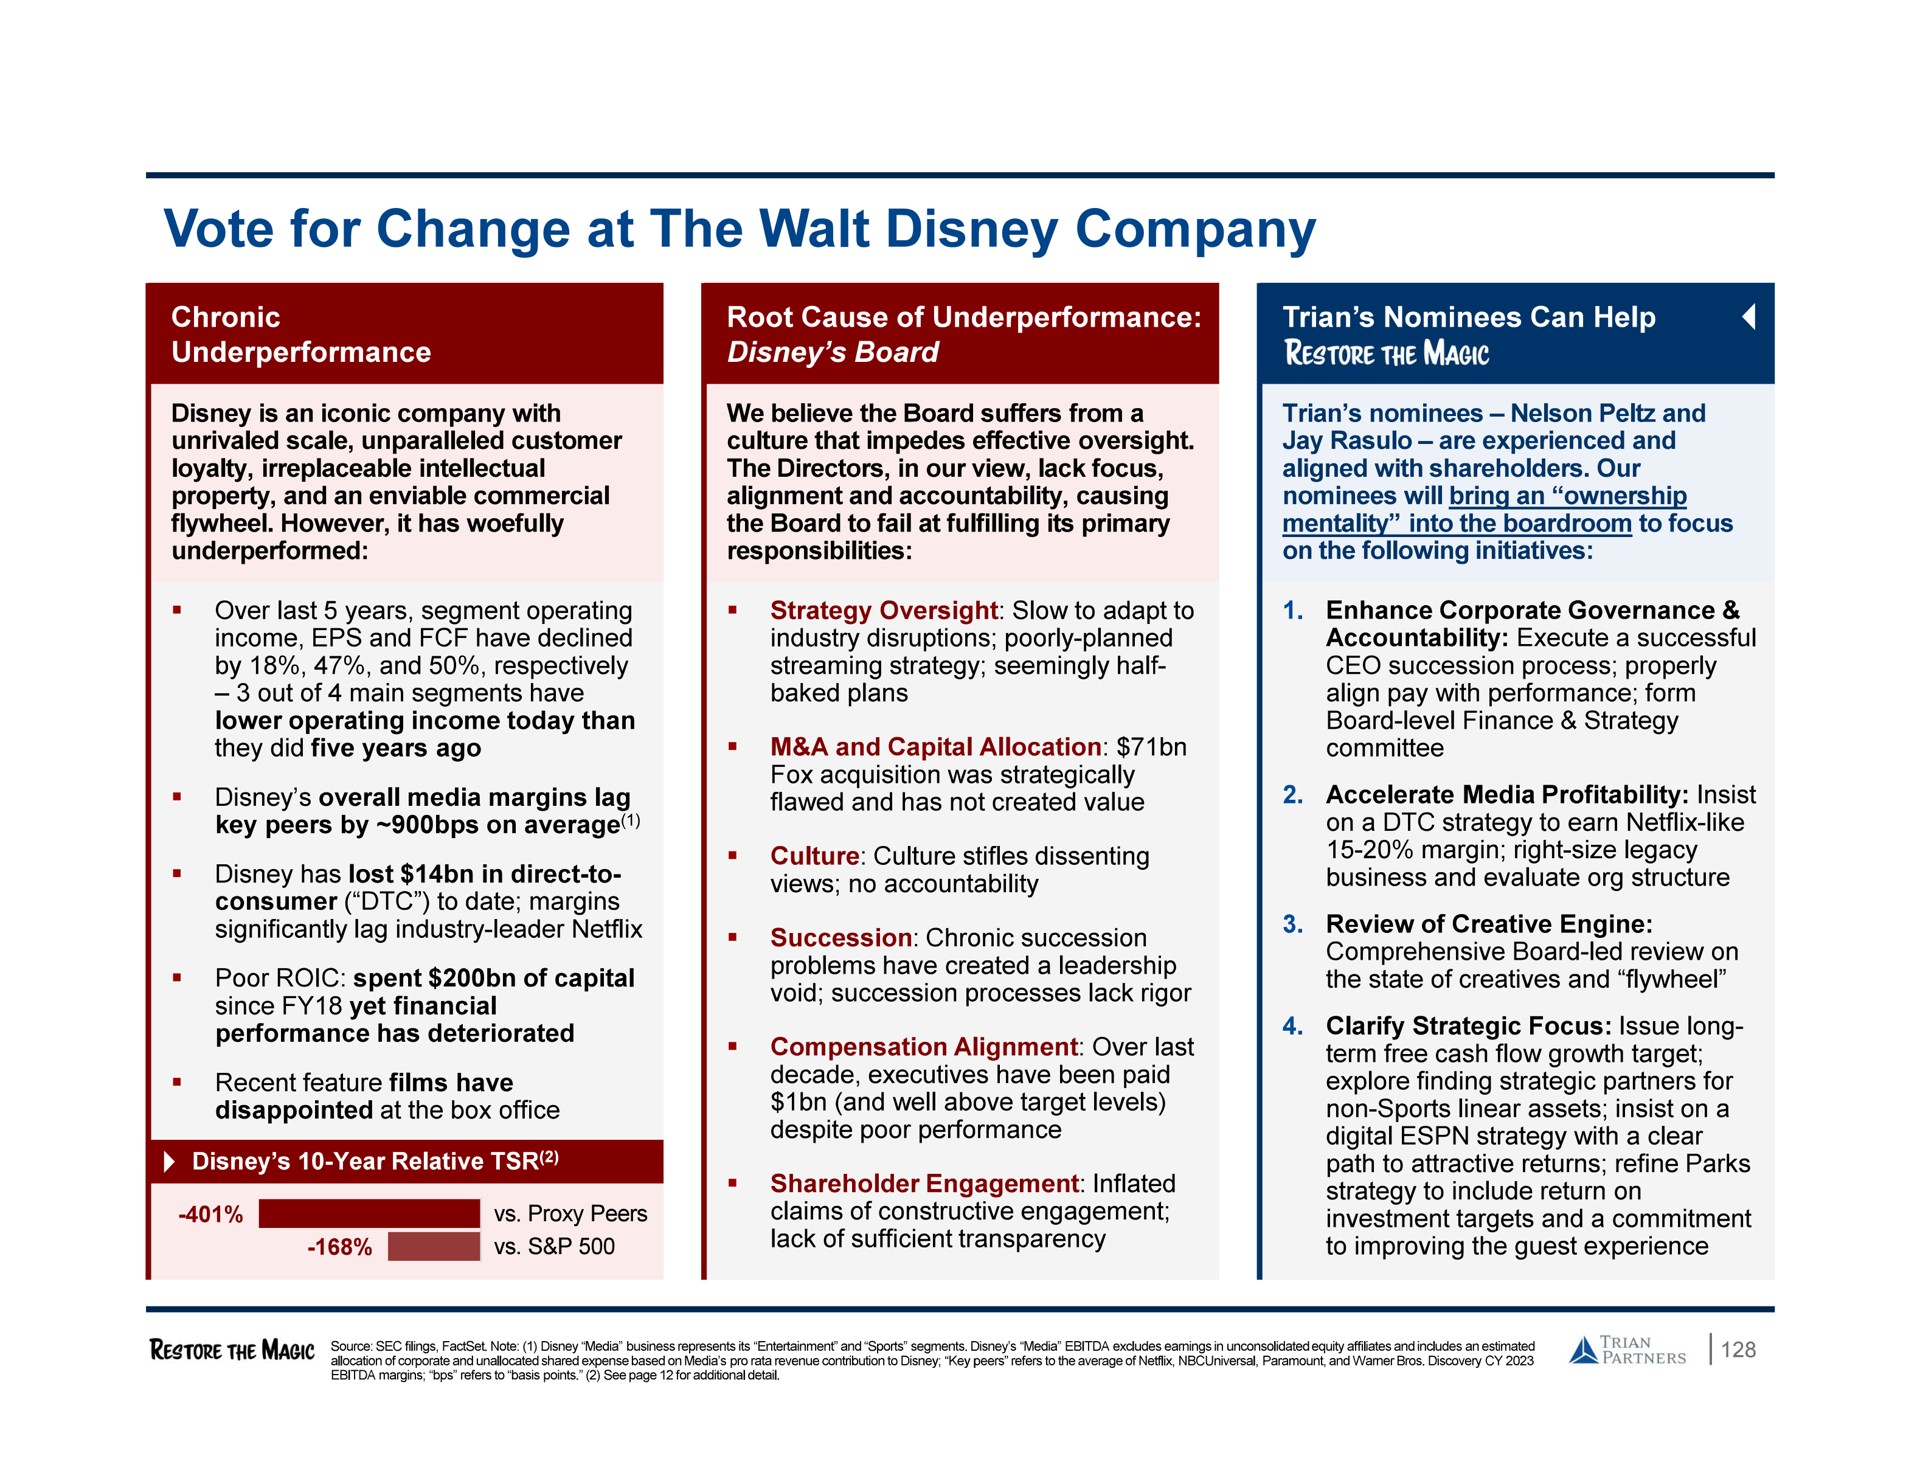 vote for change at the walt company | Trian Partners